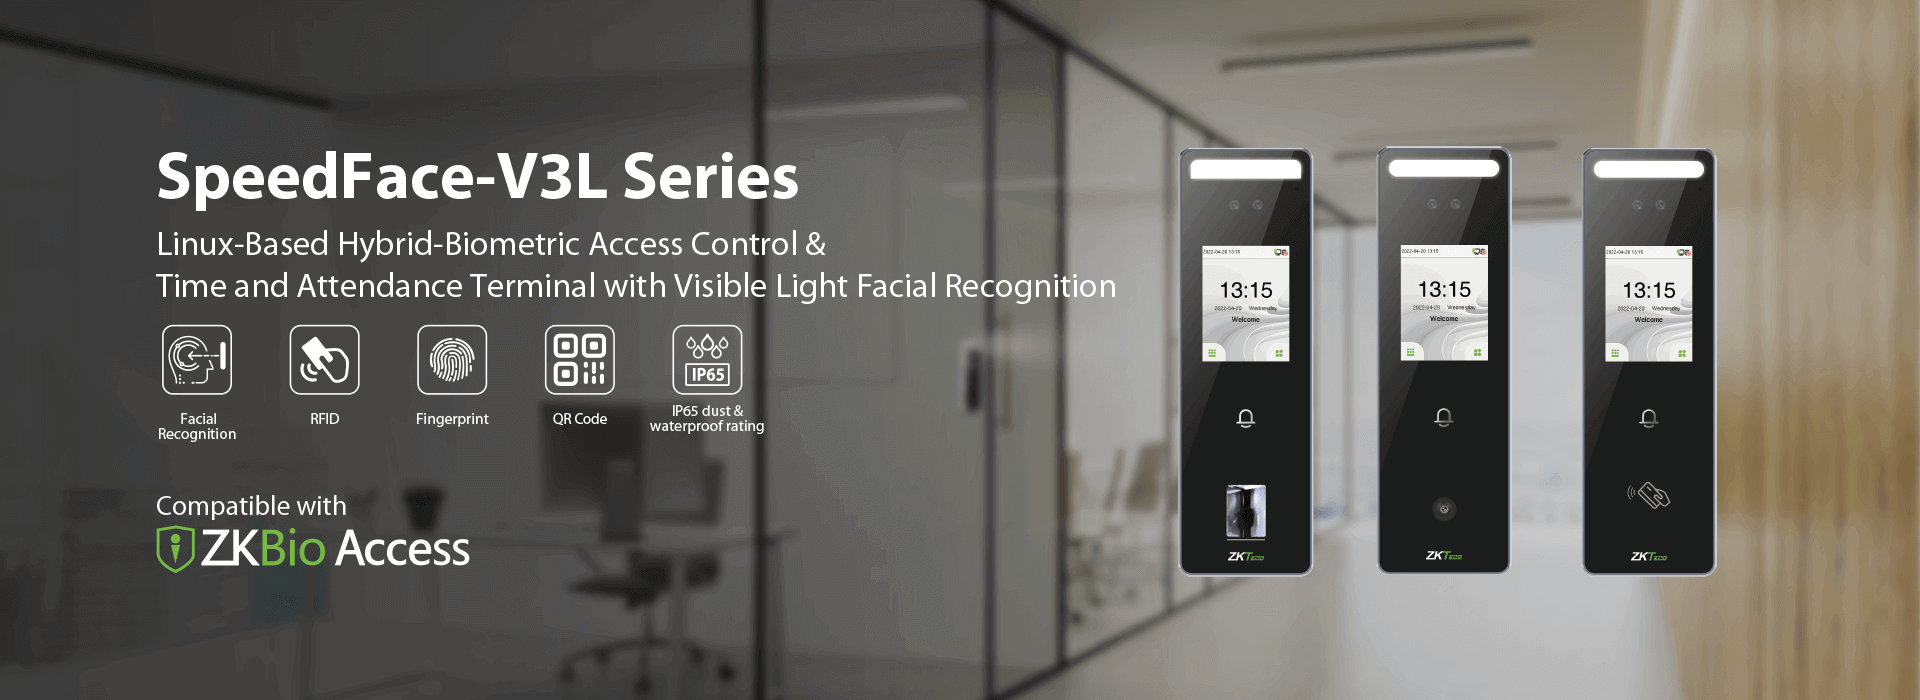 SpeedFace-V3L series device is a visible light face access control stand-alone terminal. SpeedFace-V3L supports facial recognition and fingerprint. While SpeedFace-V3L [QR] supports QR code module, and SpeedFace-V3L[RFID] support RFID verificati